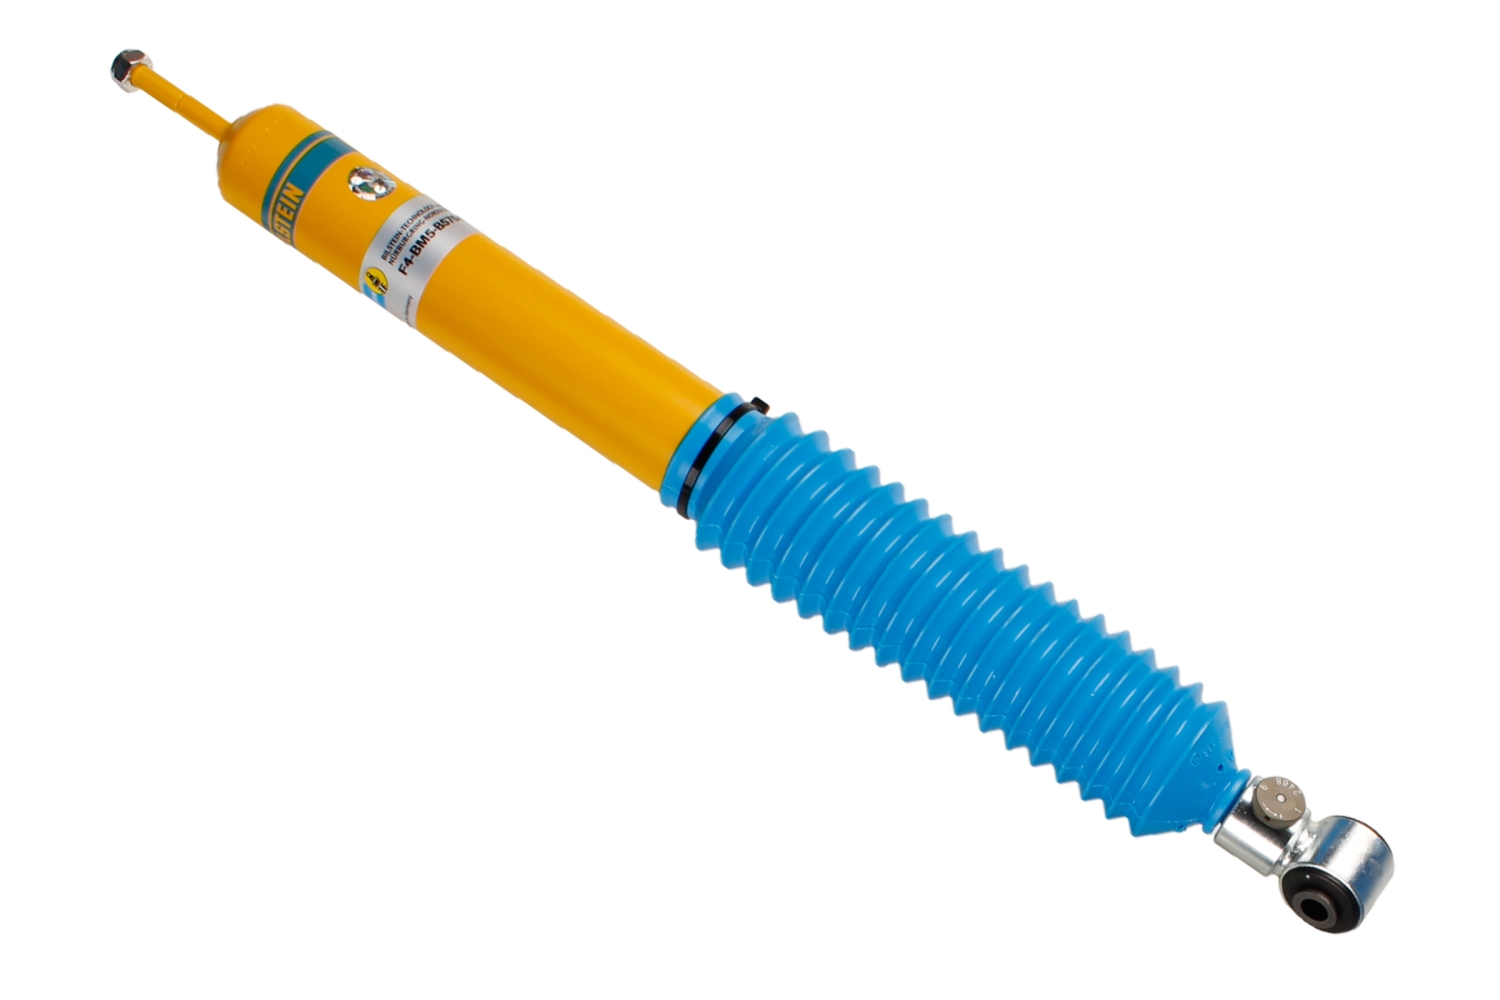 Bilstein B16 PSS9 coilovers 48-088459 BMW - 3 Serie E36 Coupe, Sedan and convertible - M3 3.0 210 kW - 08/94- 09/95